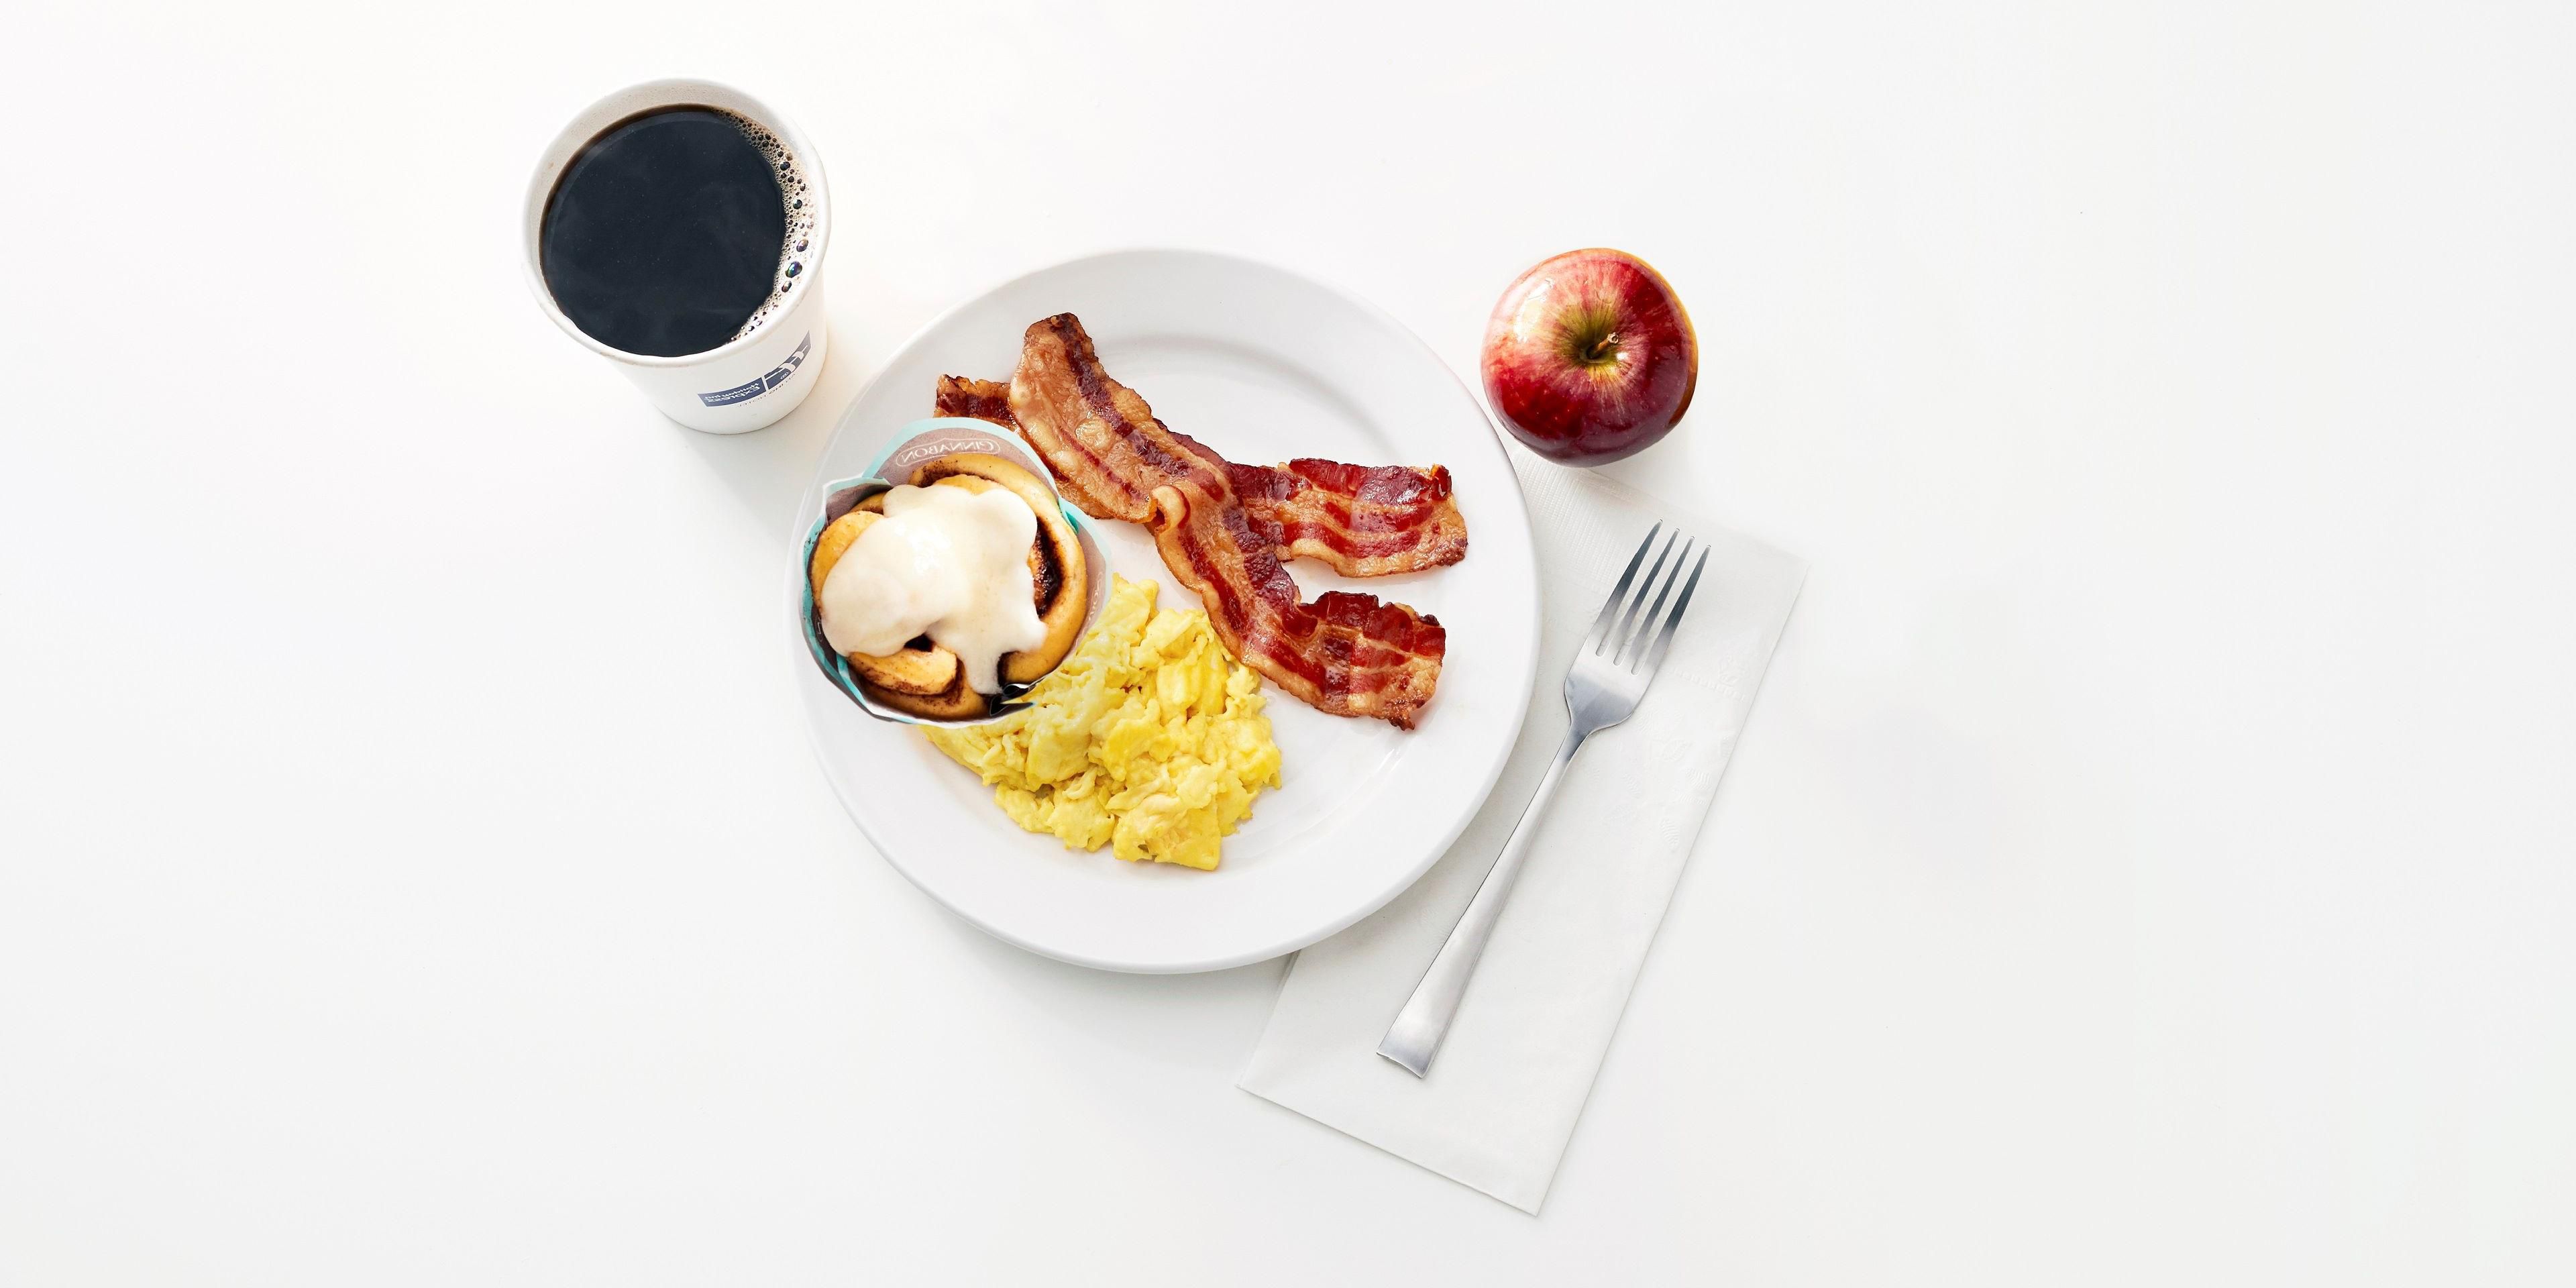 Kick start your day with our Express Start Breakfast, with grab ‘n’ go options and favorites such as eggs and bacon, hot pancakes, our signature cinnamon rolls and fresh coffee. Offered from 6:00 AM to 9:30 AM.